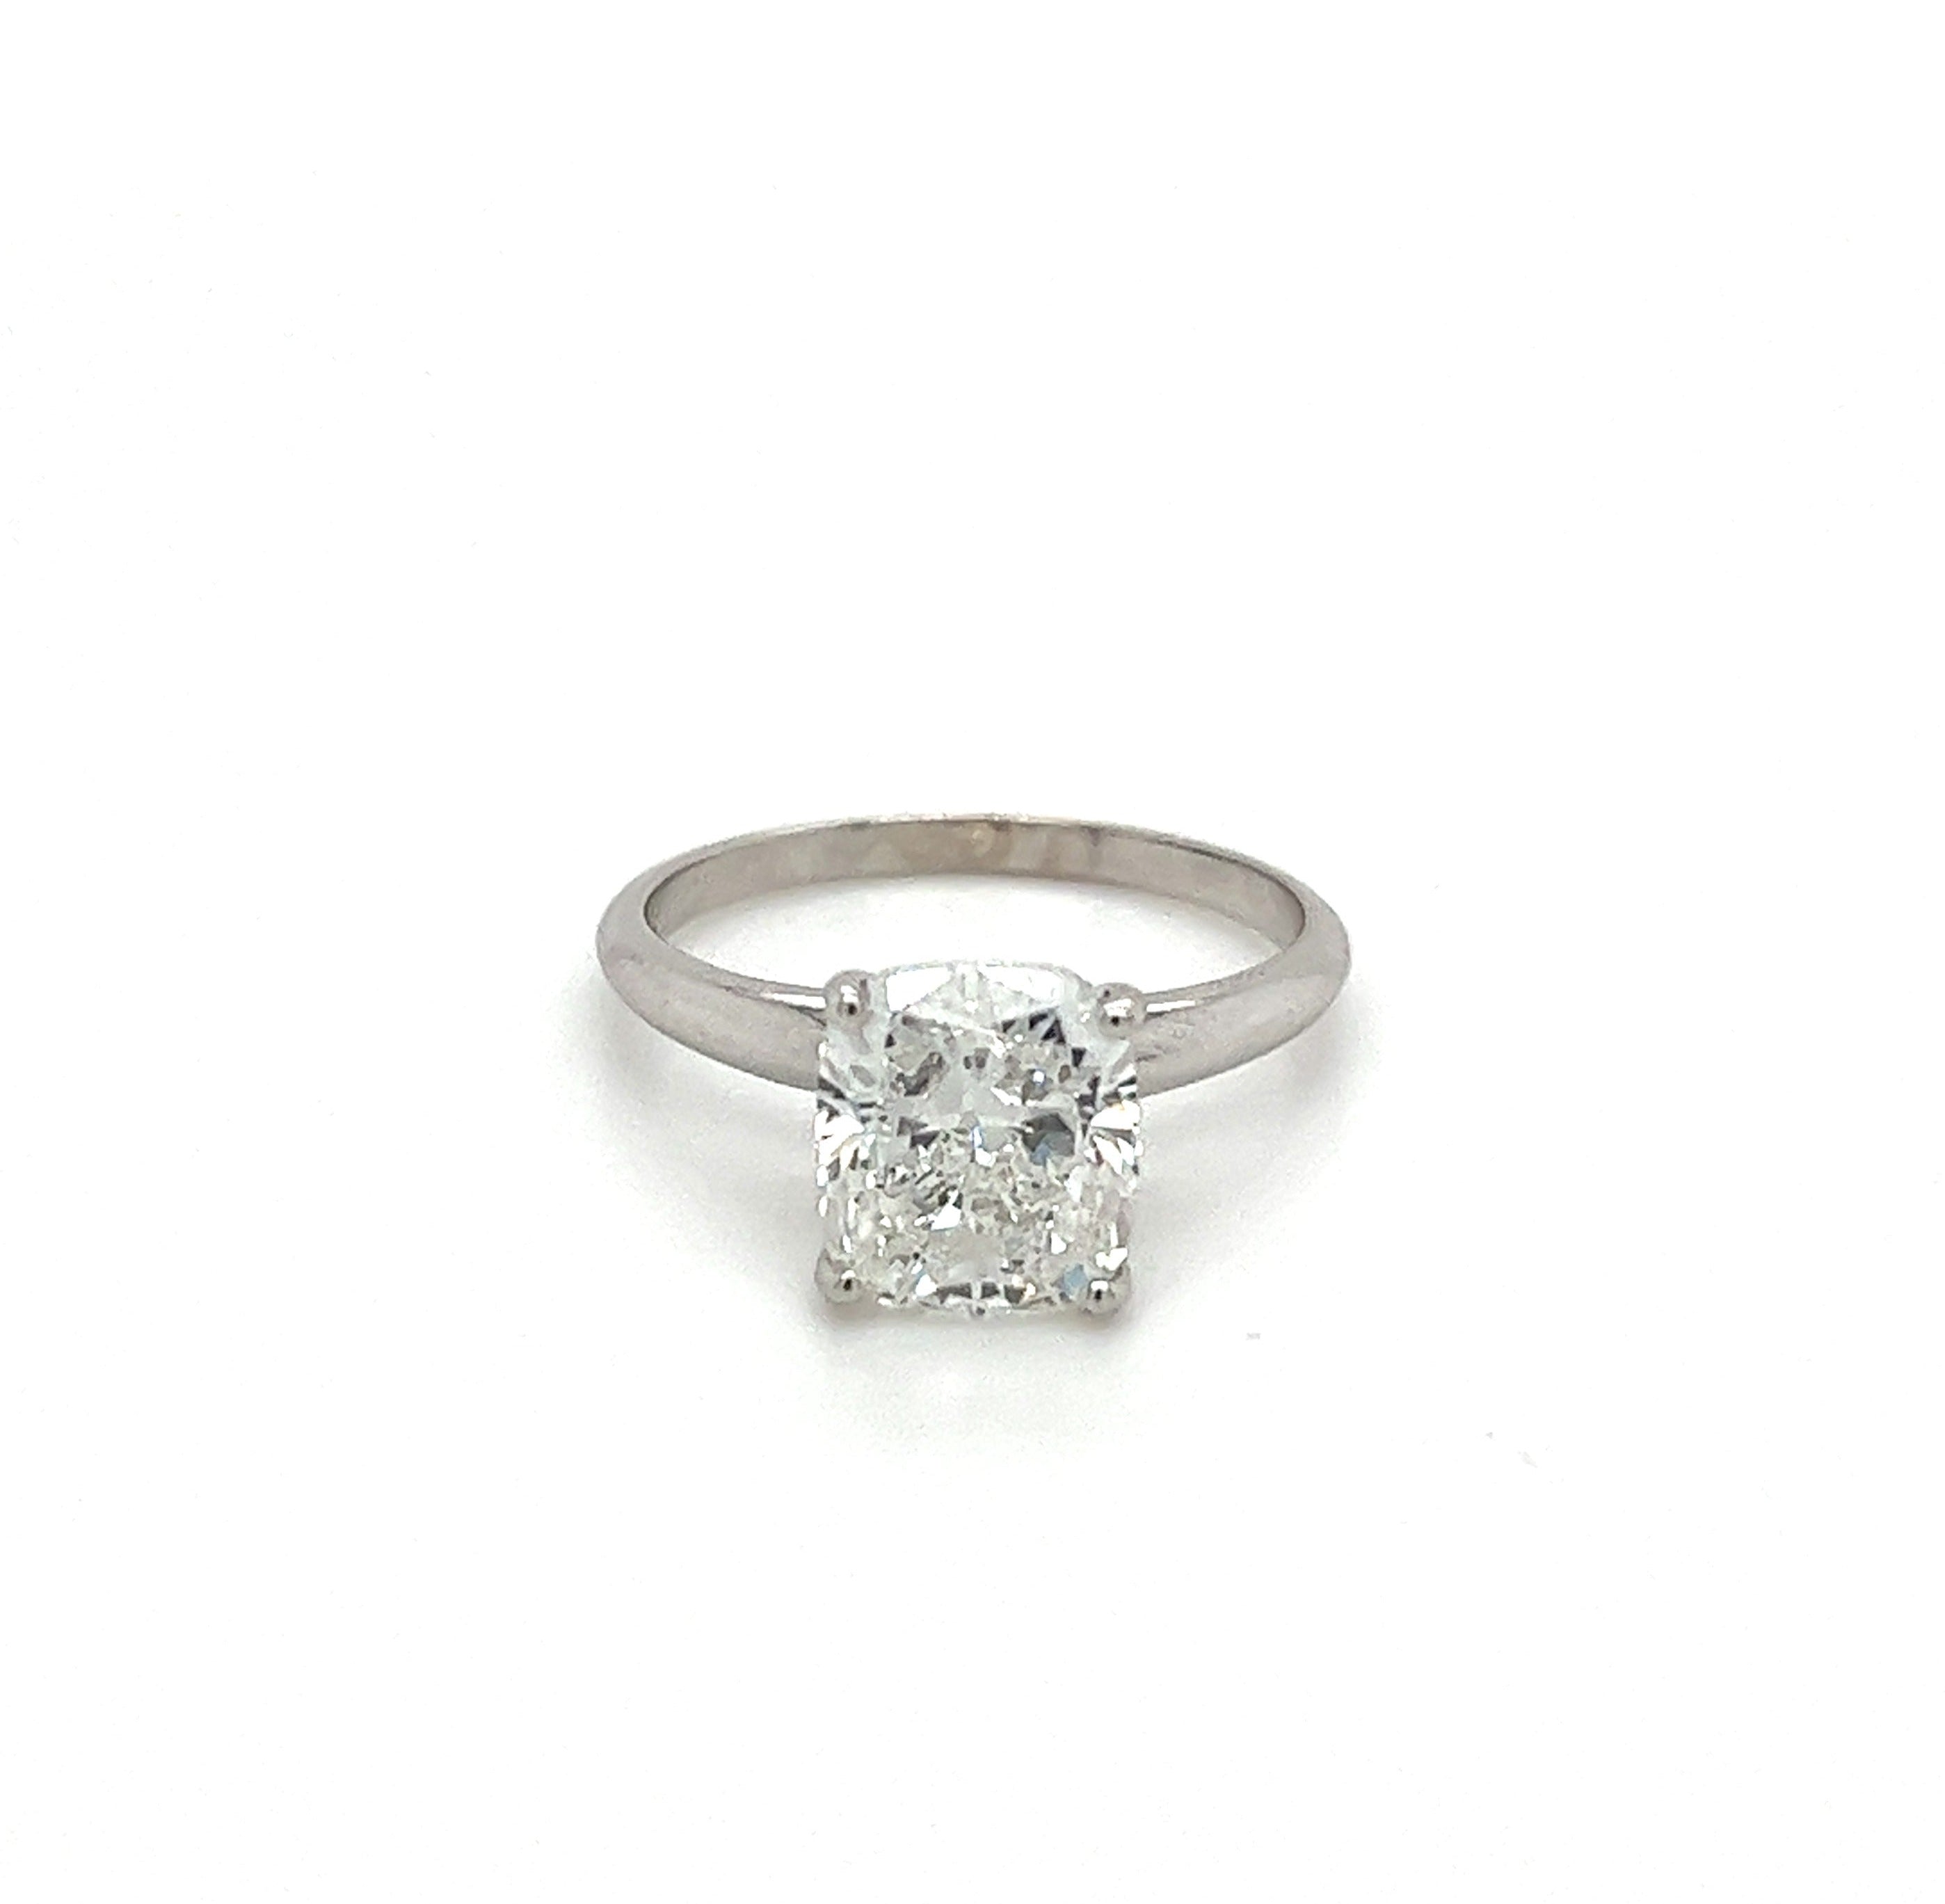 2_79-Carat-Lab-Grown-Diamond-Engagement-Ring-in-14K-White-Gold-Solitaire-4-Prong-Setting-Engagement-Ring.jpg